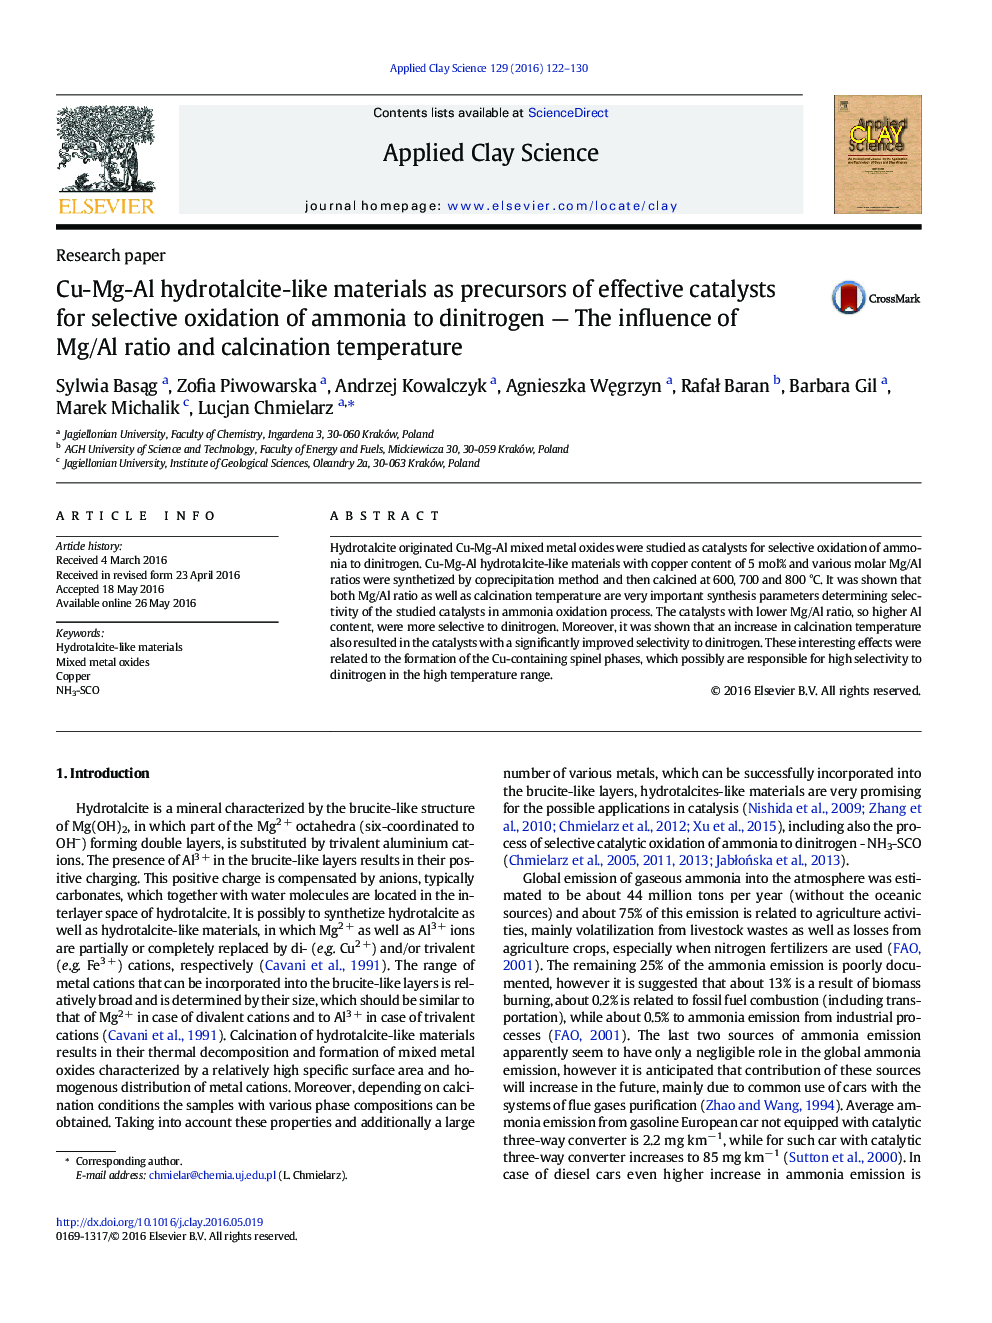 Cu-Mg-Al hydrotalcite-like materials as precursors of effective catalysts for selective oxidation of ammonia to dinitrogen — The influence of Mg/Al ratio and calcination temperature